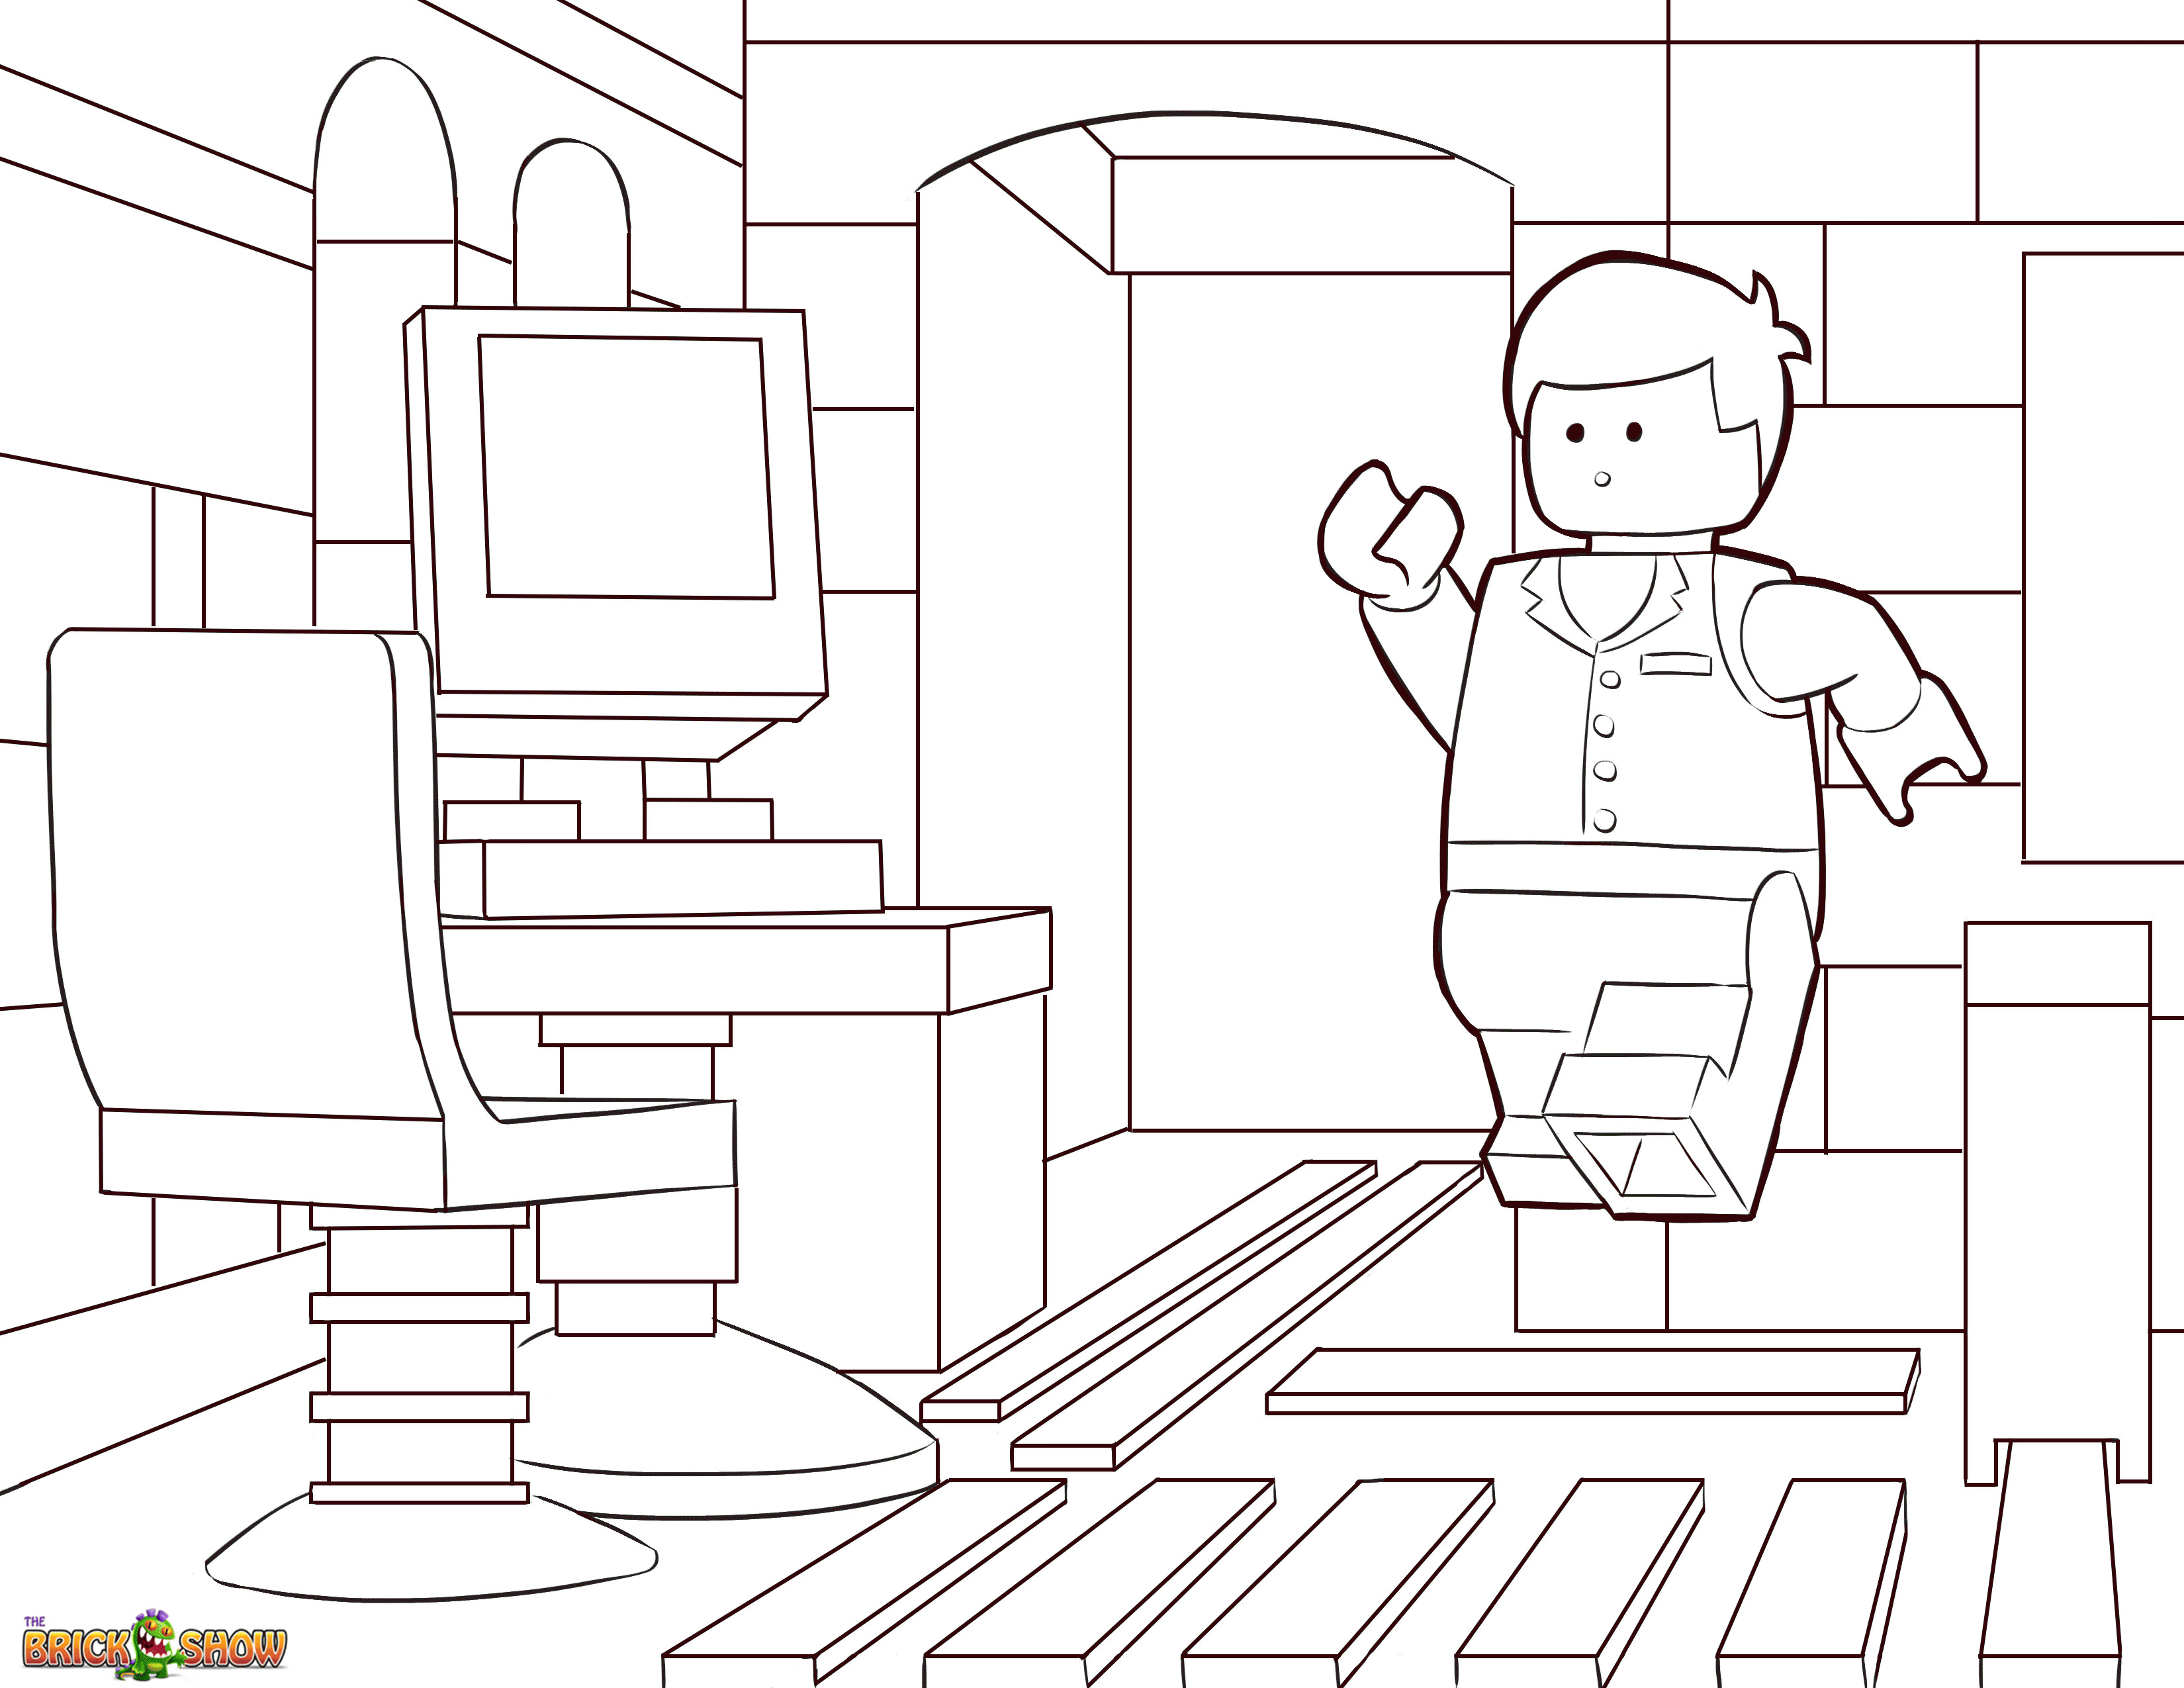 Good Morning Emmet! Coloring Page, Printable Sheet - The LEGO Movie